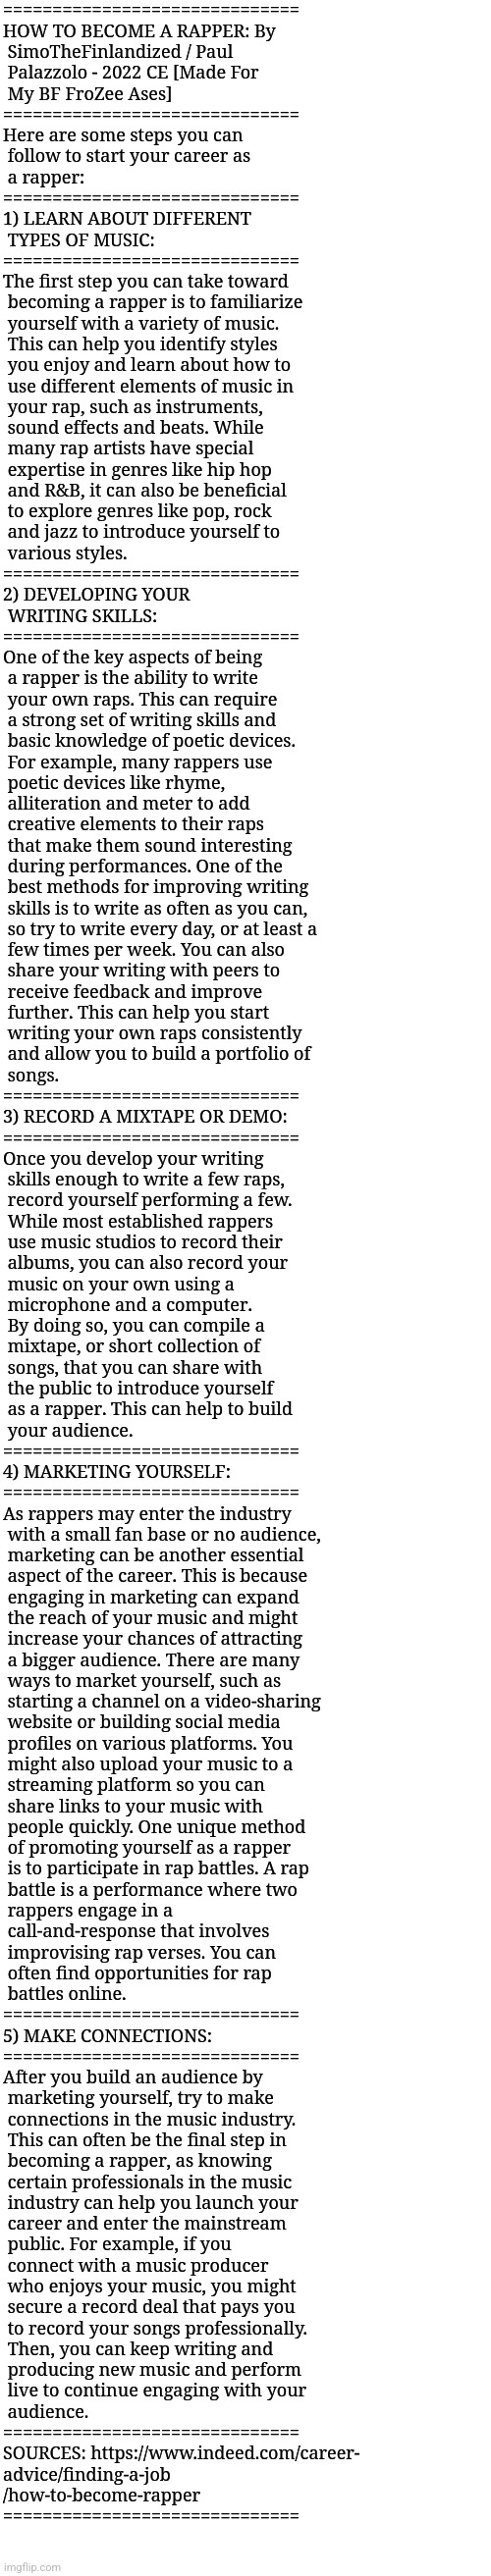 HOW TO BECOME A RAPPER: By SimoTheFinlandized / Paul Palazzolo - 2022 CE [Made For My BF FroZee Ases] | ==============================
HOW TO BECOME A RAPPER: By
 SimoTheFinlandized / Paul 
 Palazzolo - 2022 CE [Made For 
 My BF FroZee Ases]
==============================
Here are some steps you can 
 follow to start your career as 
 a rapper:
==============================
1) LEARN ABOUT DIFFERENT 
 TYPES OF MUSIC:
==============================
The first step you can take toward
 becoming a rapper is to familiarize
 yourself with a variety of music. 
 This can help you identify styles 
 you enjoy and learn about how to 
 use different elements of music in
 your rap, such as instruments, 
 sound effects and beats. While 
 many rap artists have special
 expertise in genres like hip hop 
 and R&B, it can also be beneficial 
 to explore genres like pop, rock 
 and jazz to introduce yourself to
 various styles.
==============================
2) DEVELOPING YOUR 
 WRITING SKILLS:
==============================
One of the key aspects of being 
 a rapper is the ability to write 
 your own raps. This can require 
 a strong set of writing skills and 
 basic knowledge of poetic devices.
 For example, many rappers use
 poetic devices like rhyme, 
 alliteration and meter to add 
 creative elements to their raps 
 that make them sound interesting
 during performances. One of the 
 best methods for improving writing
 skills is to write as often as you can,
 so try to write every day, or at least a
 few times per week. You can also
 share your writing with peers to
 receive feedback and improve 
 further. This can help you start
 writing your own raps consistently
 and allow you to build a portfolio of
 songs.
==============================
3) RECORD A MIXTAPE OR DEMO:
==============================
Once you develop your writing 
 skills enough to write a few raps,
 record yourself performing a few.
 While most established rappers 
 use music studios to record their
 albums, you can also record your
 music on your own using a
 microphone and a computer. 
 By doing so, you can compile a
 mixtape, or short collection of 
 songs, that you can share with 
 the public to introduce yourself 
 as a rapper. This can help to build
 your audience.
==============================
4) MARKETING YOURSELF:
==============================
As rappers may enter the industry
 with a small fan base or no audience,
 marketing can be another essential
 aspect of the career. This is because
 engaging in marketing can expand
 the reach of your music and might
 increase your chances of attracting 
 a bigger audience. There are many
 ways to market yourself, such as
 starting a channel on a video-sharing
 website or building social media
 profiles on various platforms. You
 might also upload your music to a
 streaming platform so you can 
 share links to your music with 
 people quickly. One unique method 
 of promoting yourself as a rapper 
 is to participate in rap battles. A rap
 battle is a performance where two
 rappers engage in a
 call-and-response that involves
 improvising rap verses. You can 
 often find opportunities for rap
 battles online.
==============================
5) MAKE CONNECTIONS:
==============================
After you build an audience by
 marketing yourself, try to make
 connections in the music industry.
 This can often be the final step in
 becoming a rapper, as knowing
 certain professionals in the music
 industry can help you launch your
 career and enter the mainstream
 public. For example, if you 
 connect with a music producer  
 who enjoys your music, you might
 secure a record deal that pays you 
 to record your songs professionally.
 Then, you can keep writing and
 producing new music and perform
 live to continue engaging with your
 audience.
==============================
SOURCES: https://www.indeed.com/career-
advice/finding-a-job
/how-to-become-rapper
============================== | image tagged in simothefinlandized,rappers,jobs,tutorial,essay,how to become | made w/ Imgflip meme maker